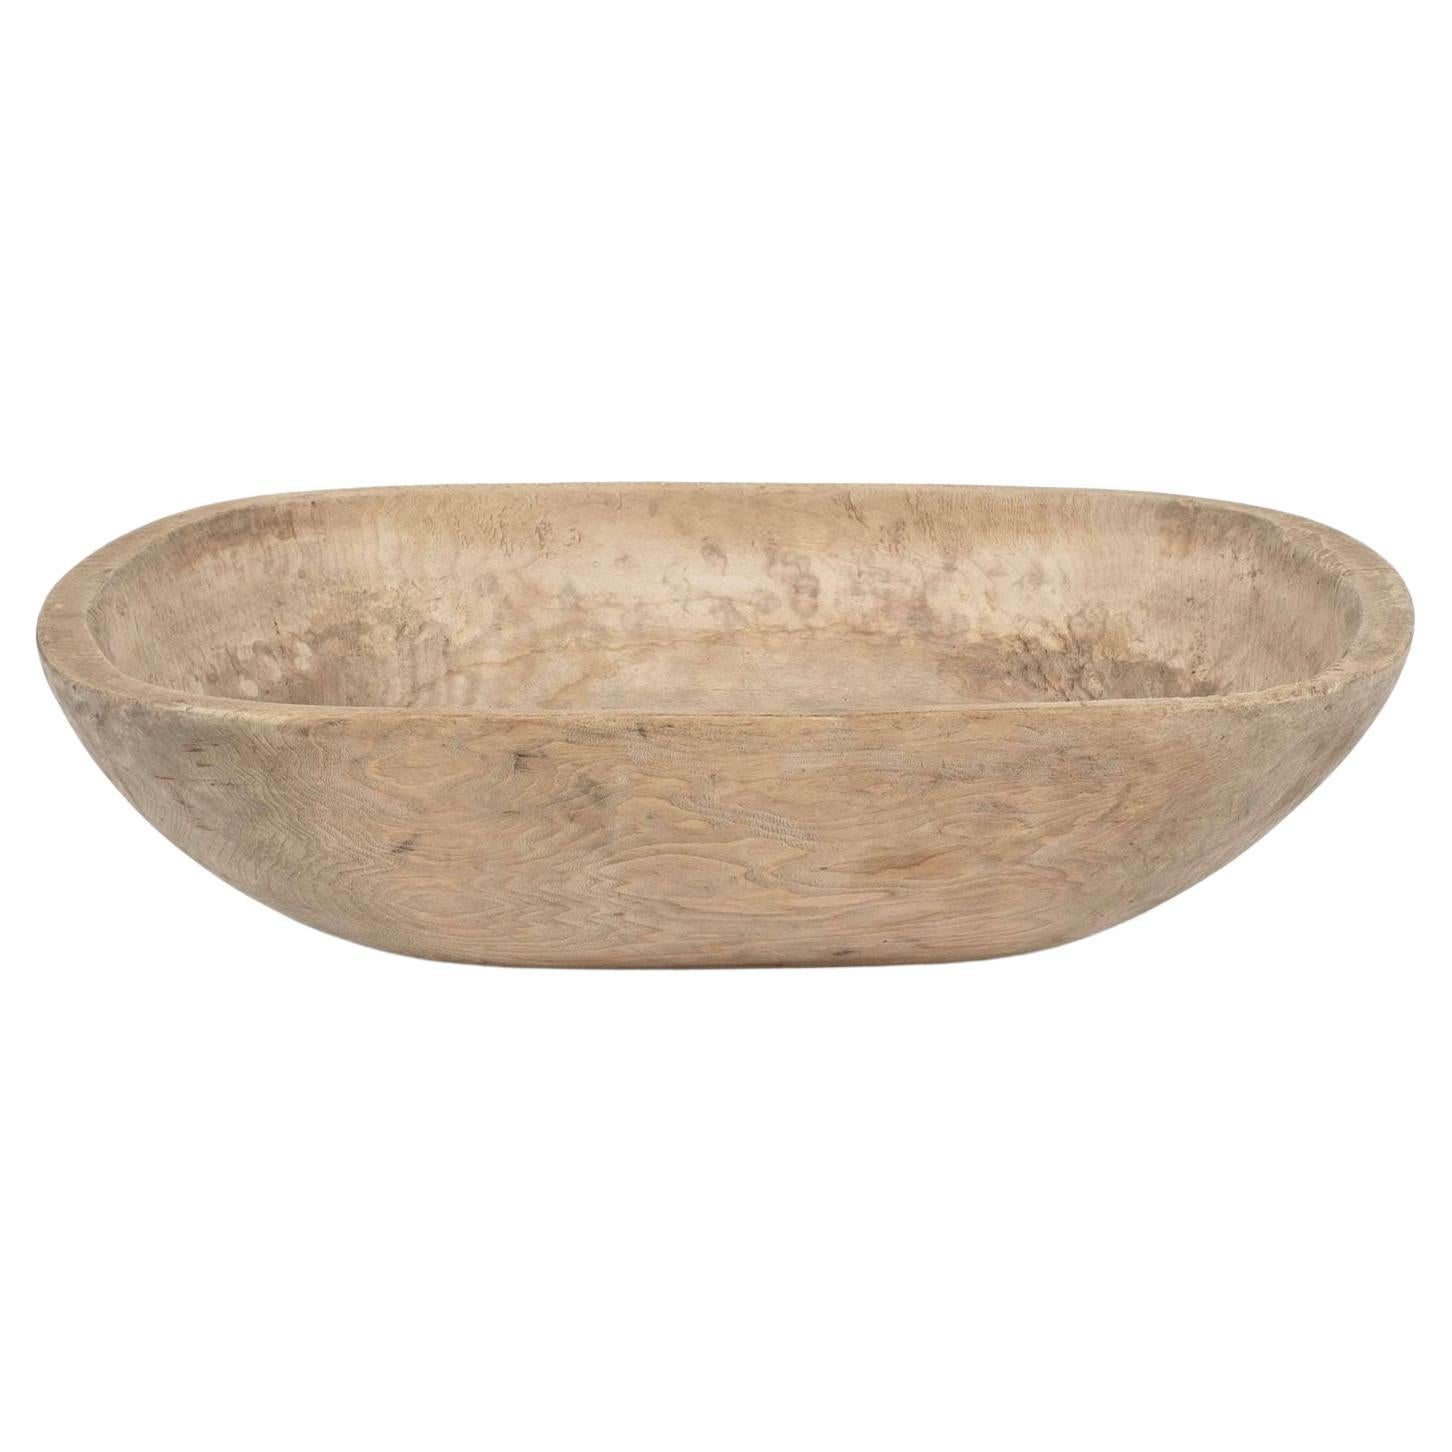 Trencher-Shaped Rustic Swedish Dug Out Bowl For Sale